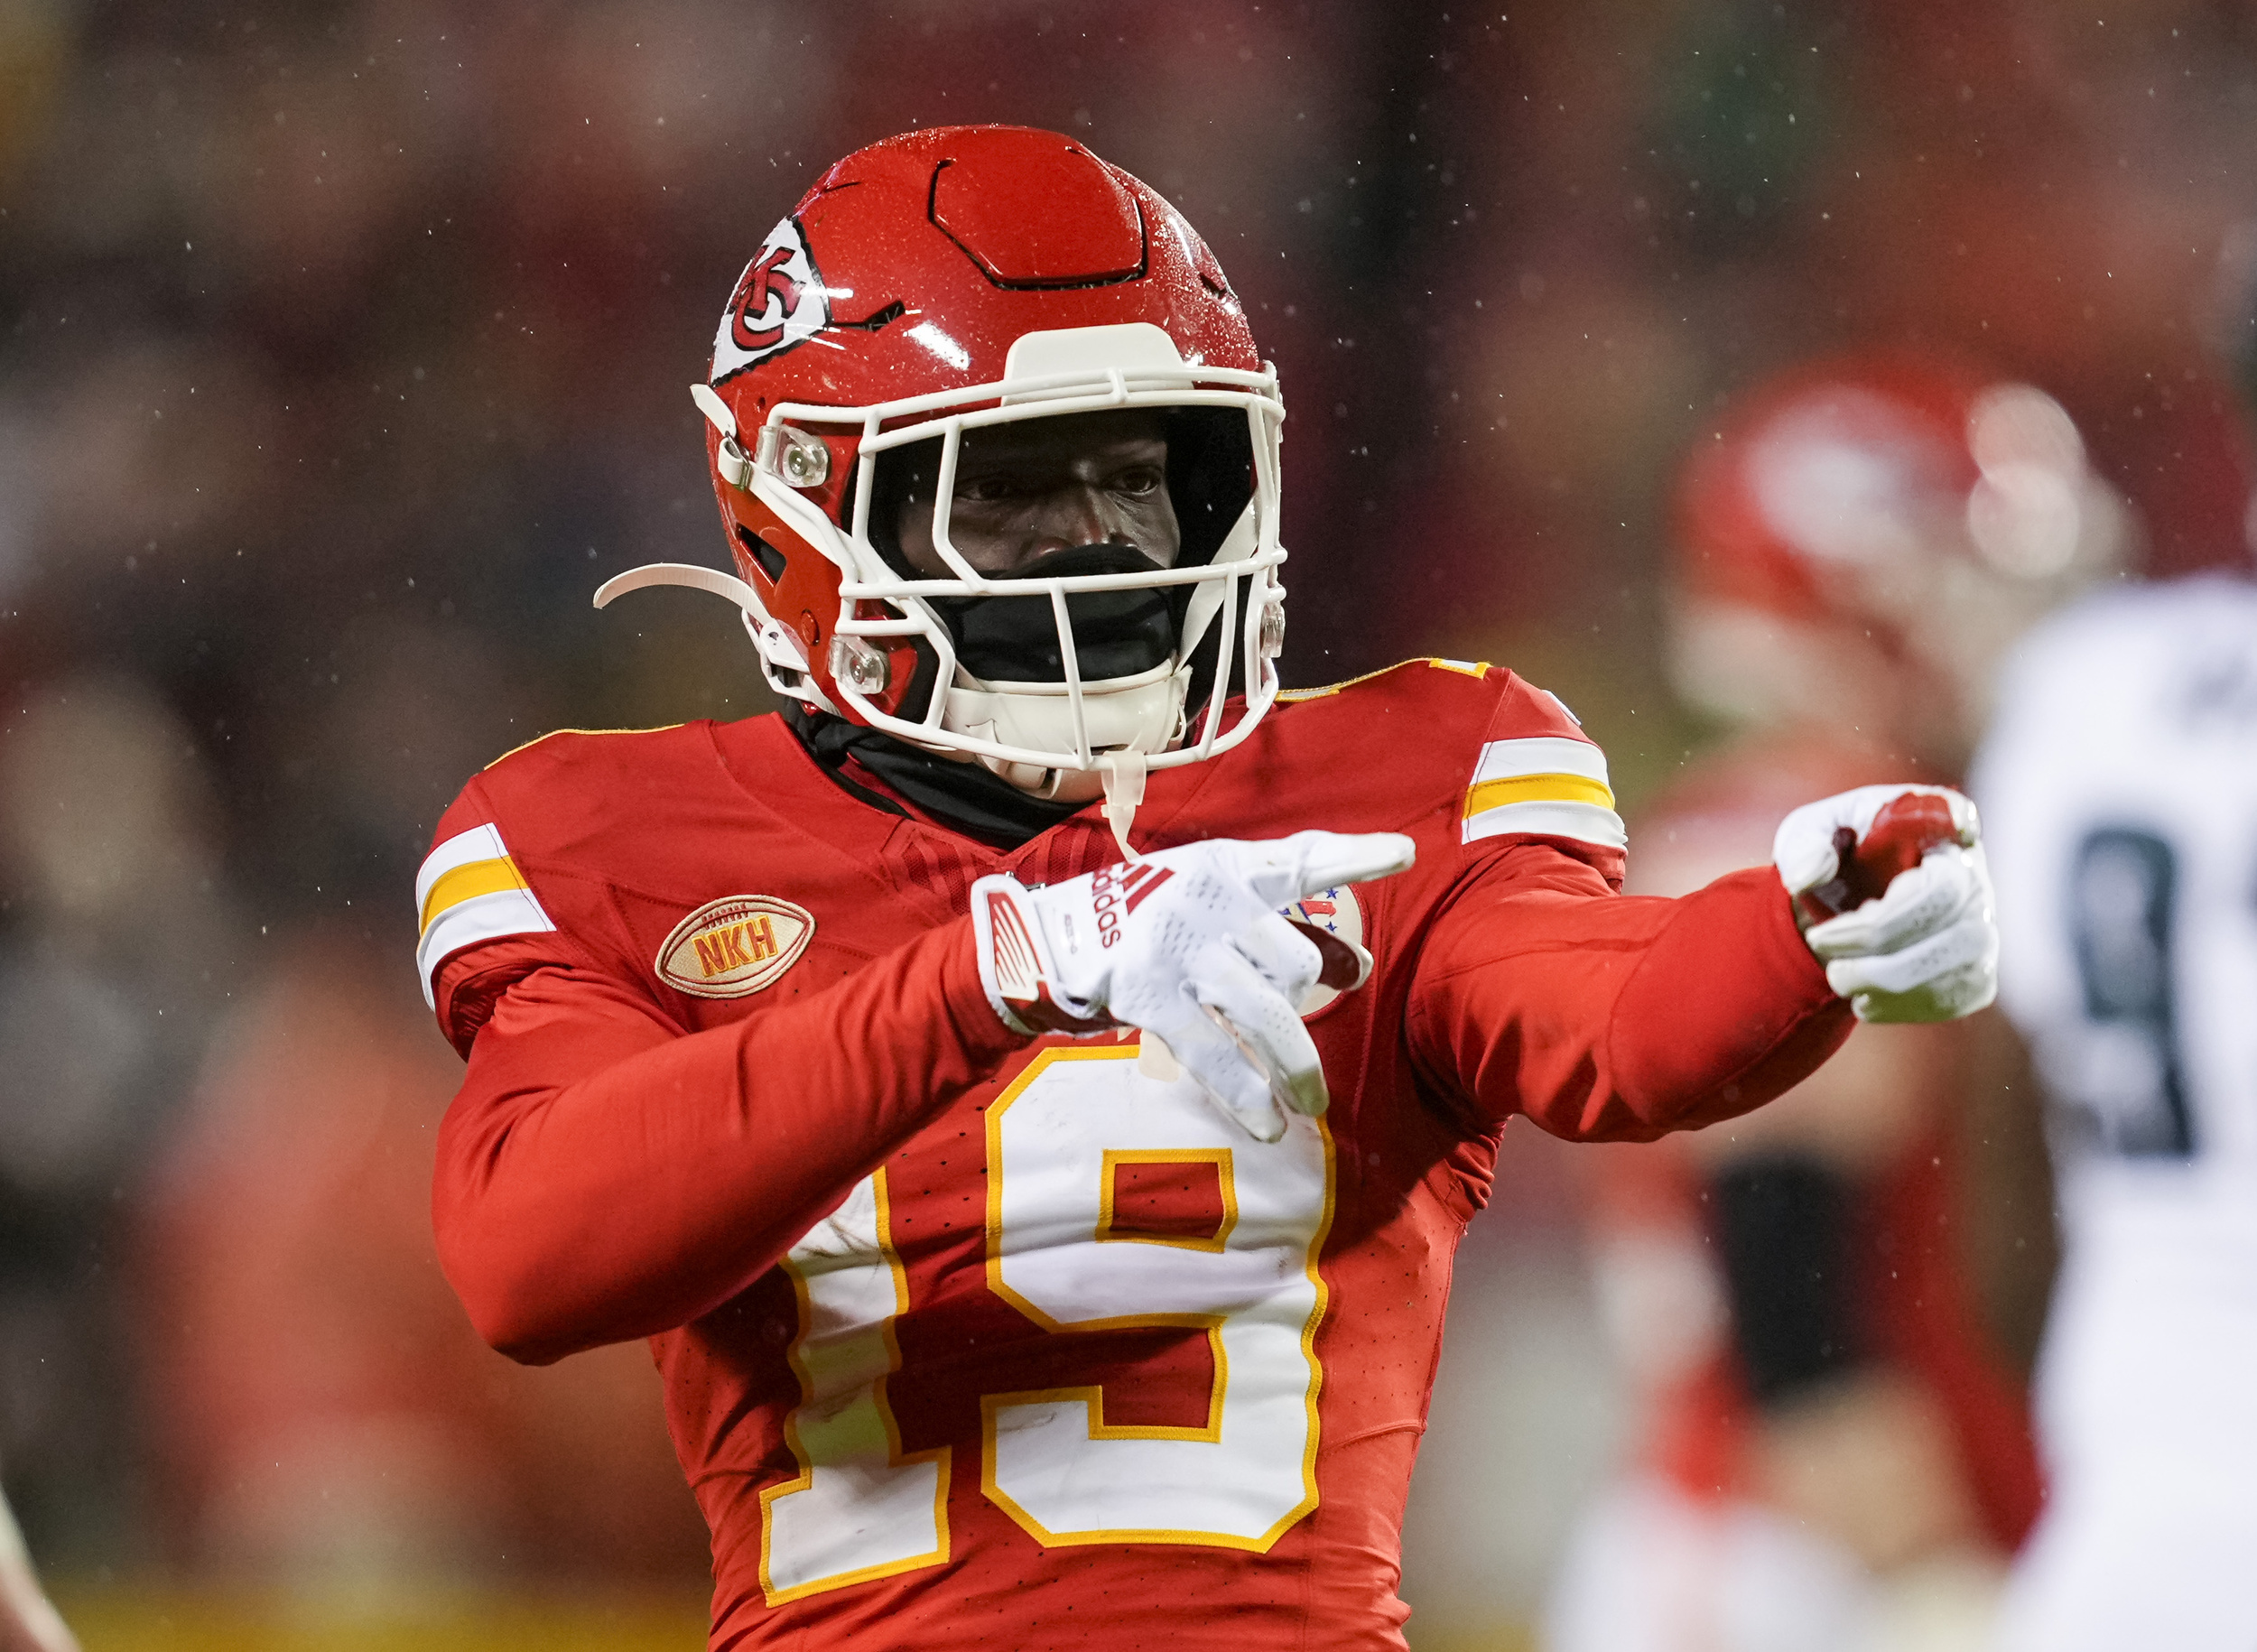 New angle of offsides play makes Kadarius Toney, Chiefs look even worse